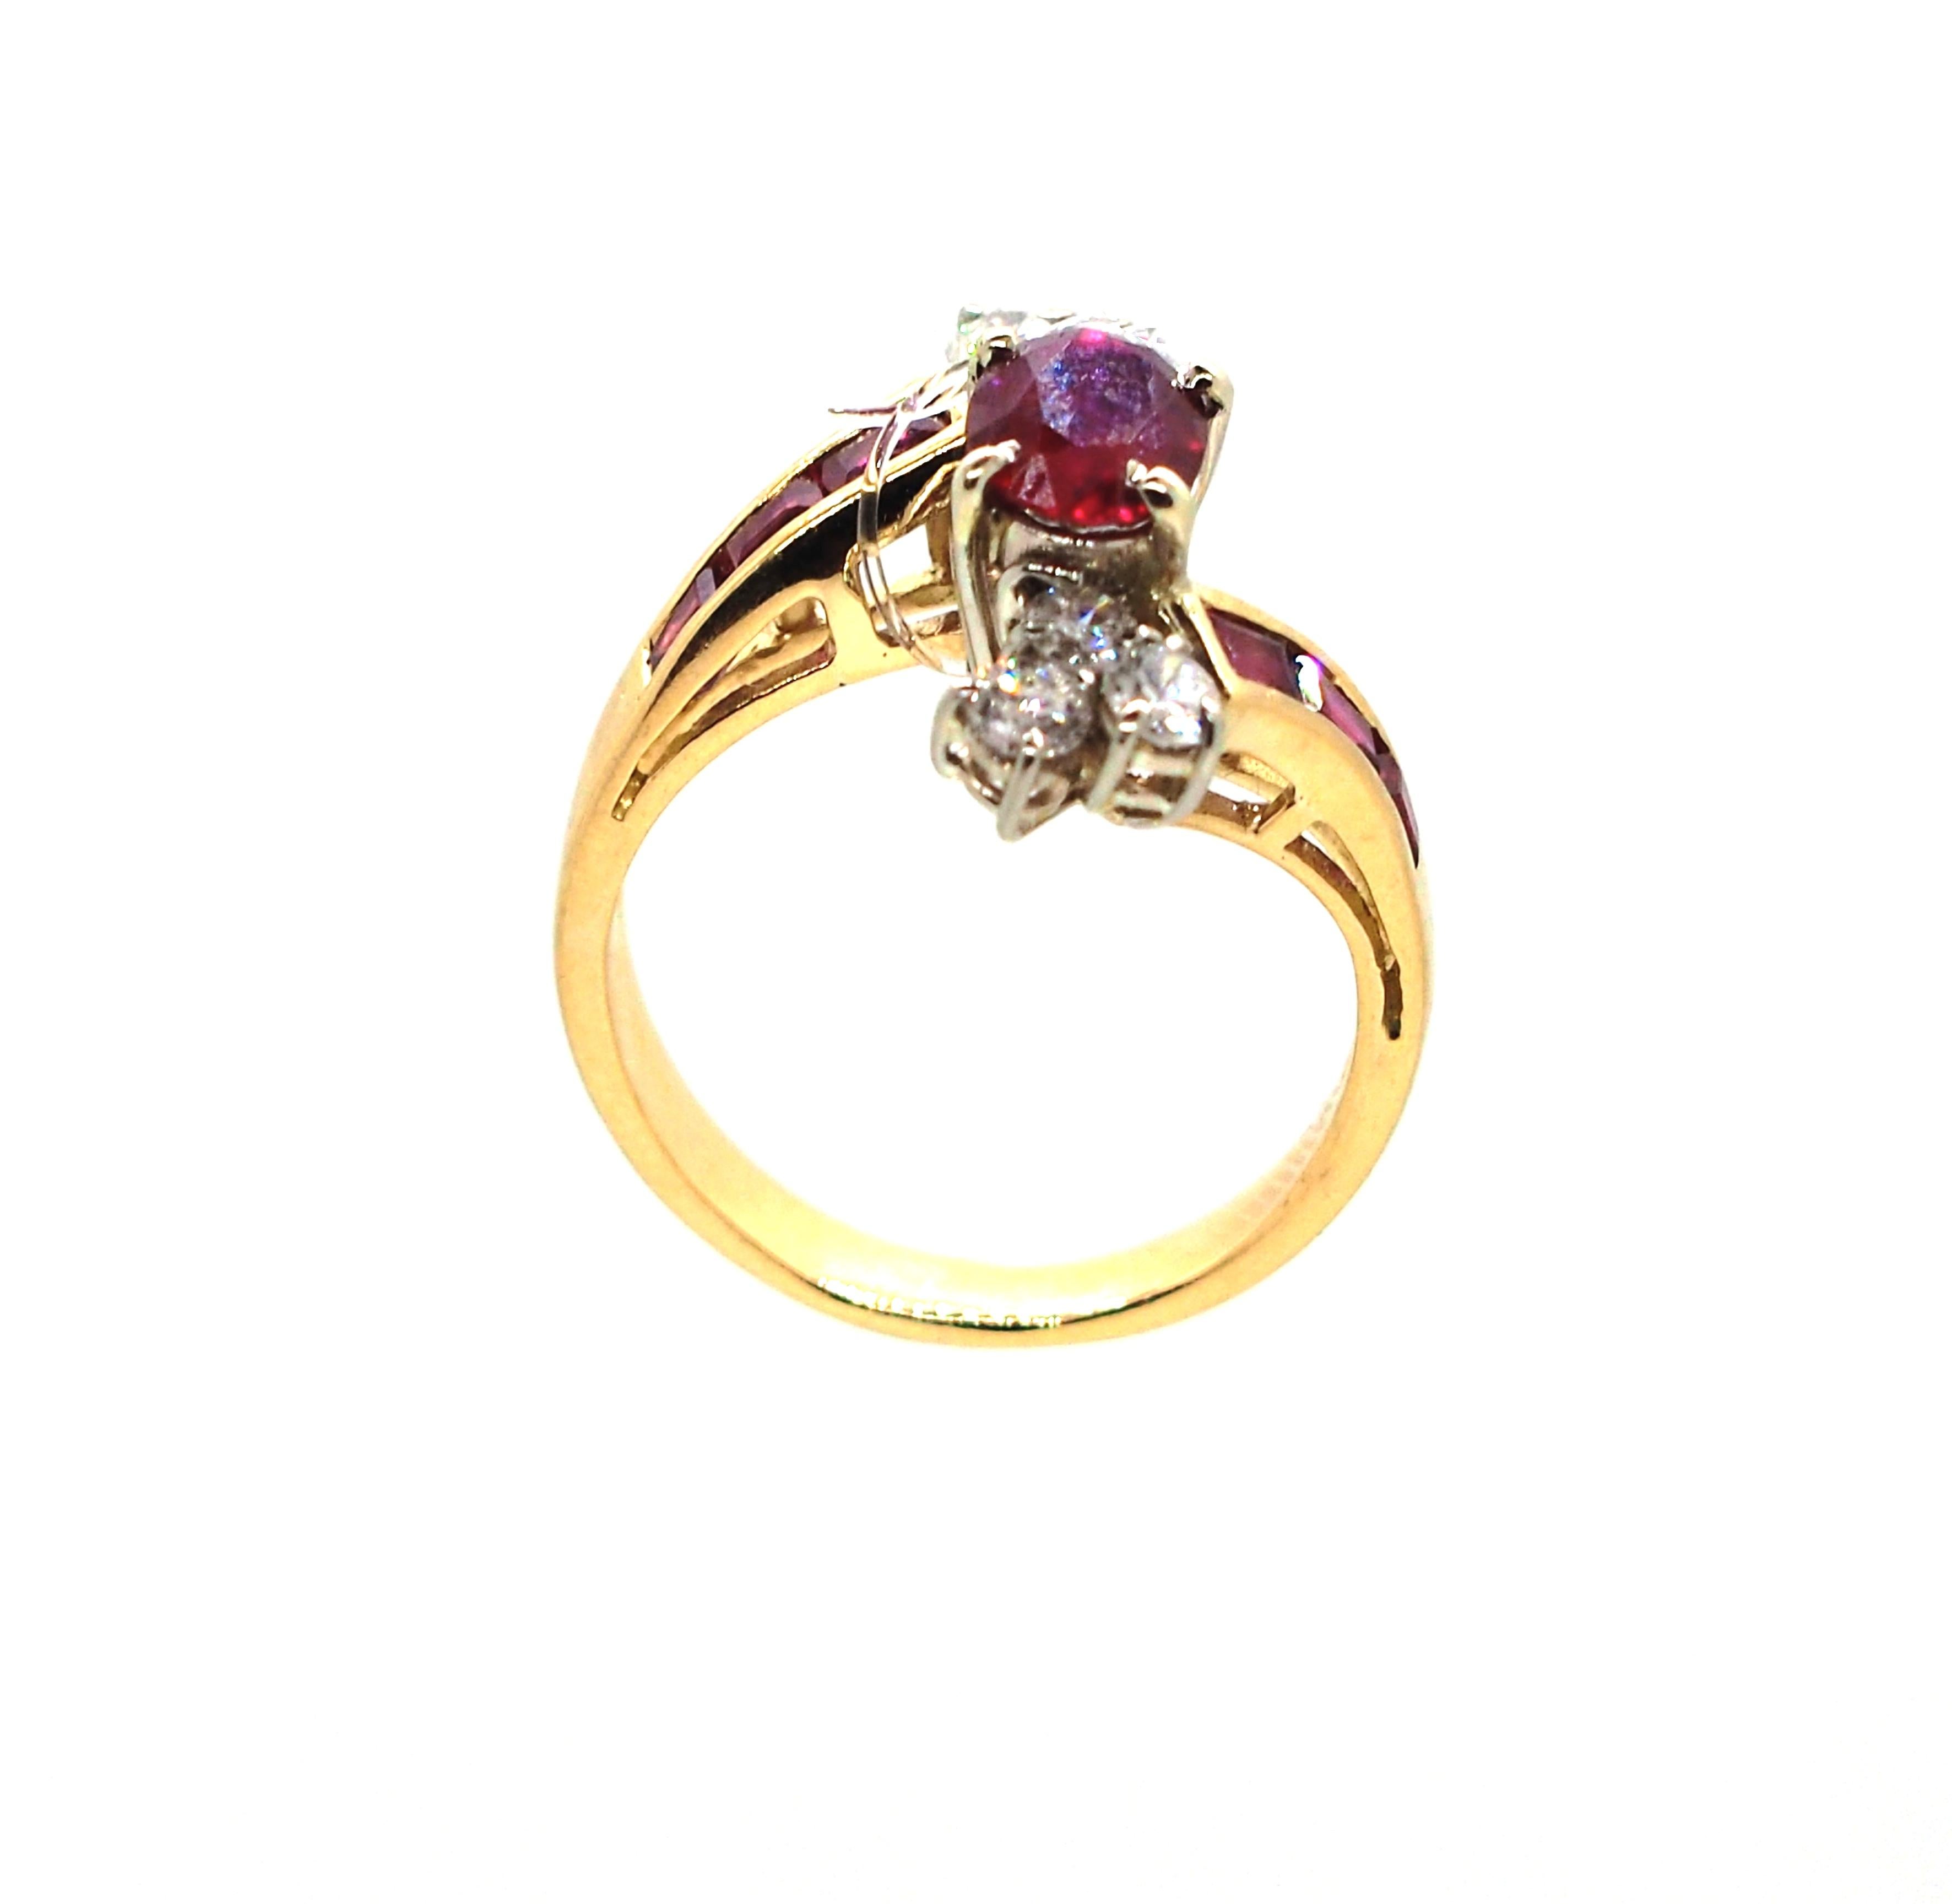 Introducing a ruby ring with an oval and baguette rubies and 6 diamonds is a stunning piece of jewelry that combines the rich color of rubies with the sparkle of diamonds approximately 0,6 carat. The centerpiece of the ring is an oval ruby that is